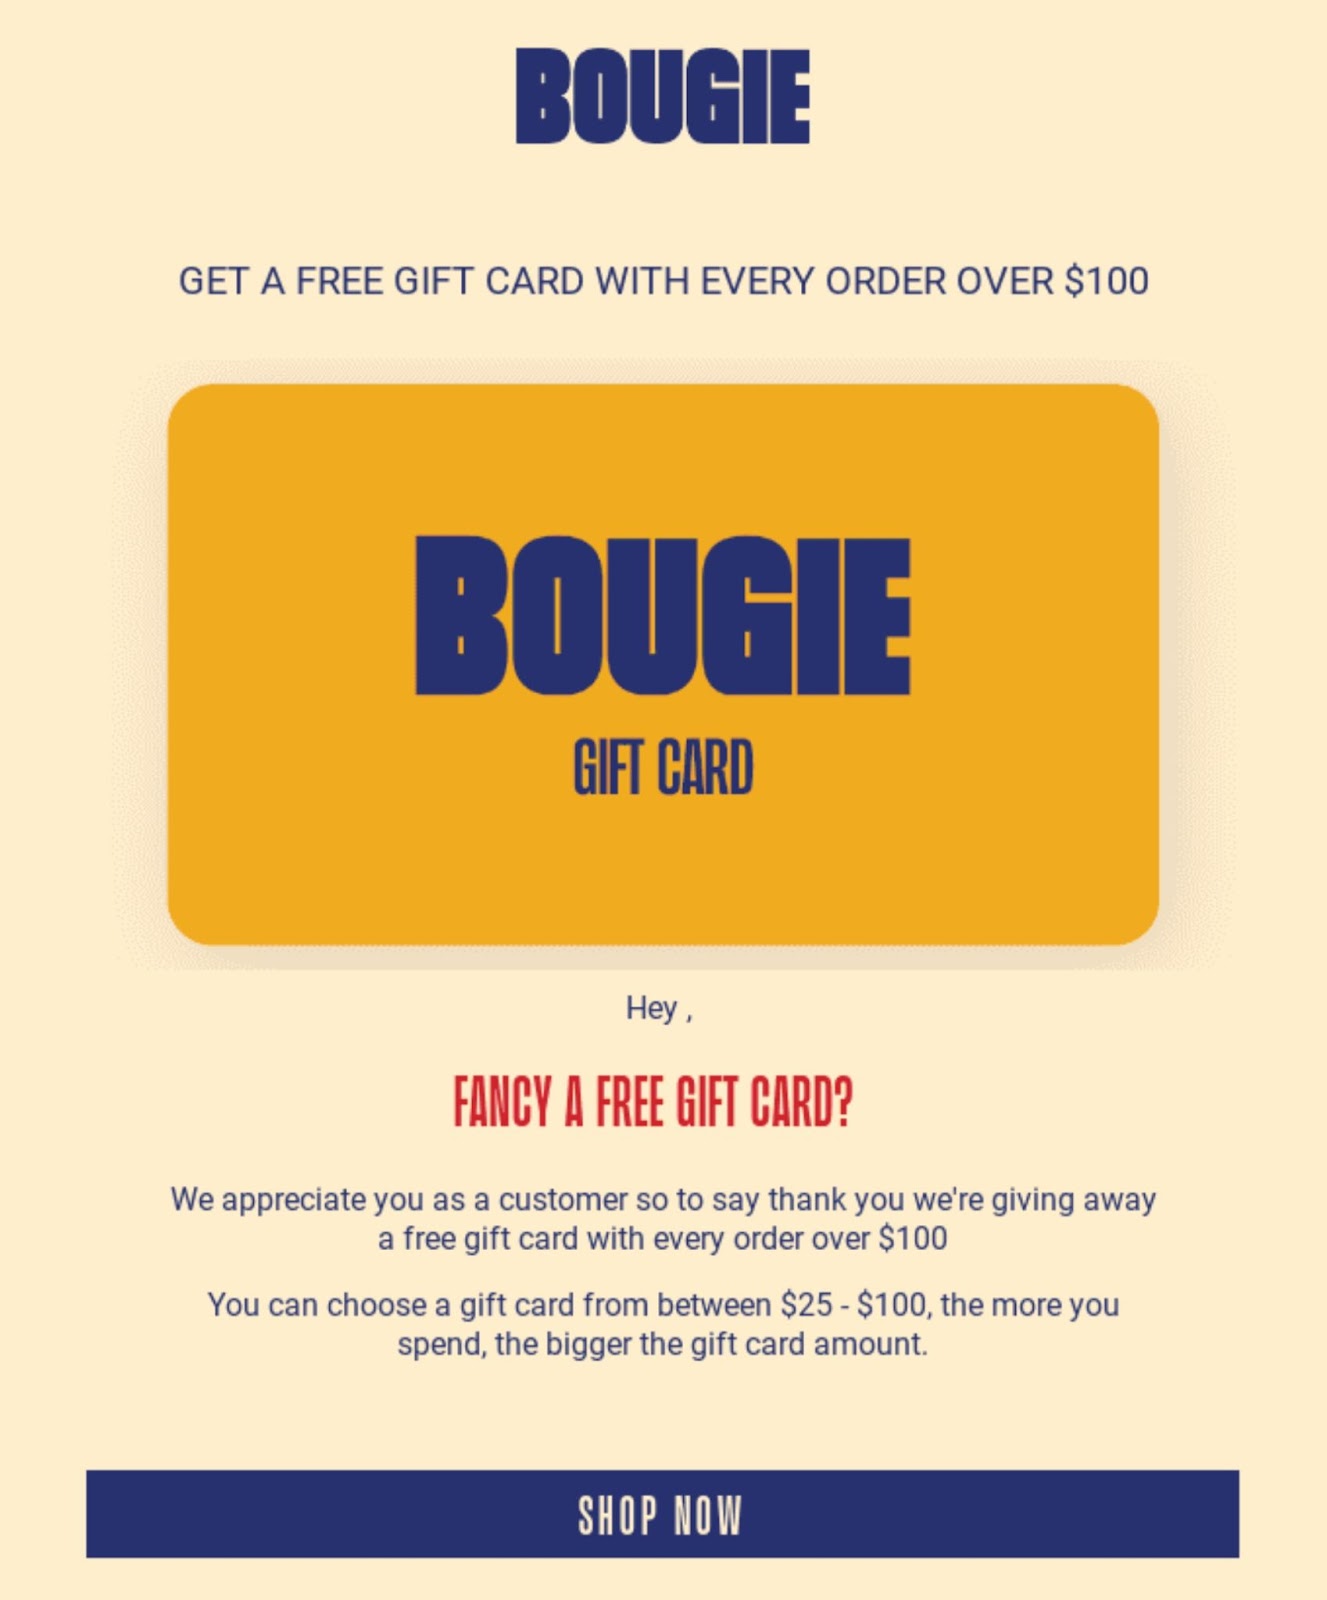 A reactivation email from, vintage homeware store, Bougie, offering a free gift card on every new order of over 100$.